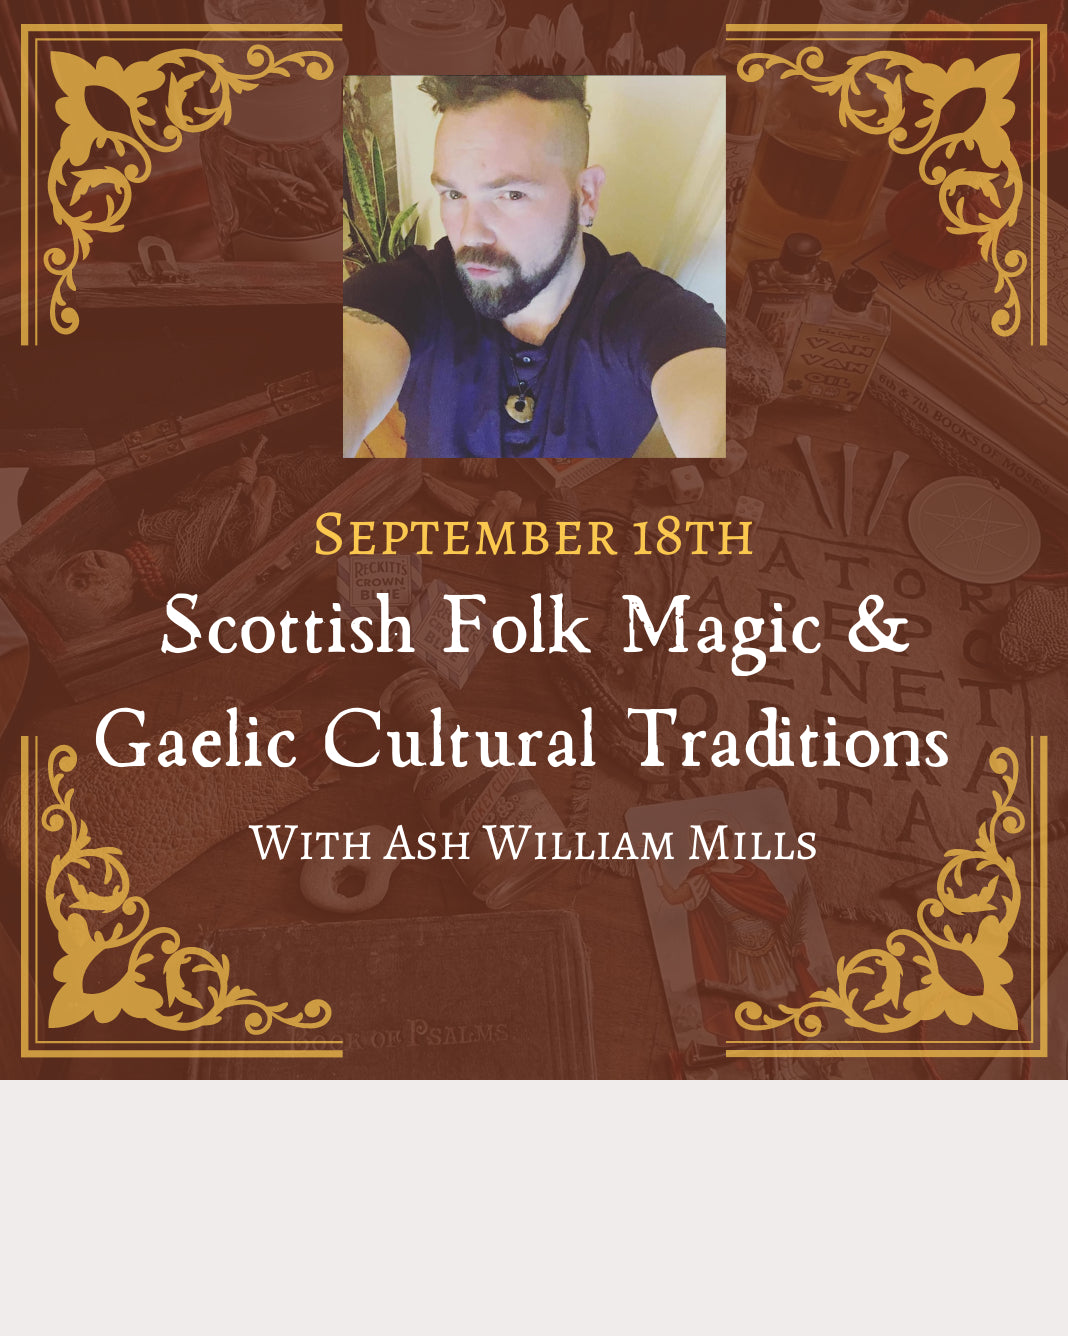 Scottish Folk Magic and Gaelic Cultural Traditions with Ash William Mills